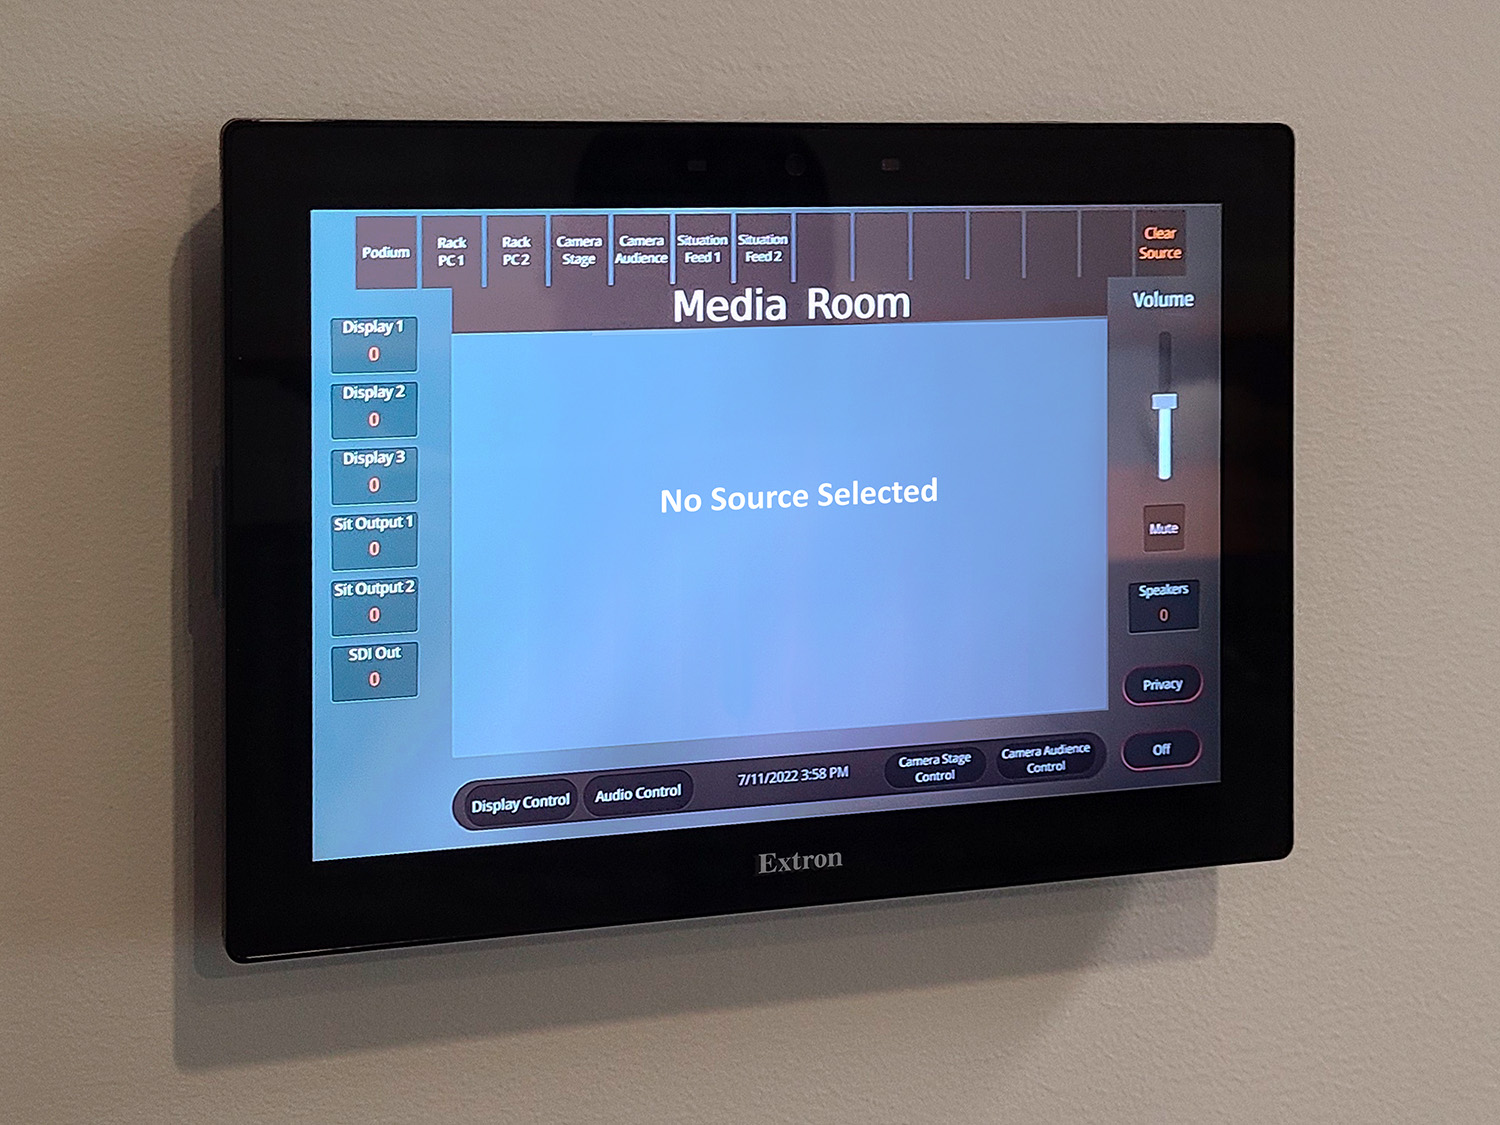 Thumbnail - TouchLink Pro touchpanels with an intuitive user interface such as this 10" wall-mount model in the Media Room facilitate easy selection of sources and display devices within the space.